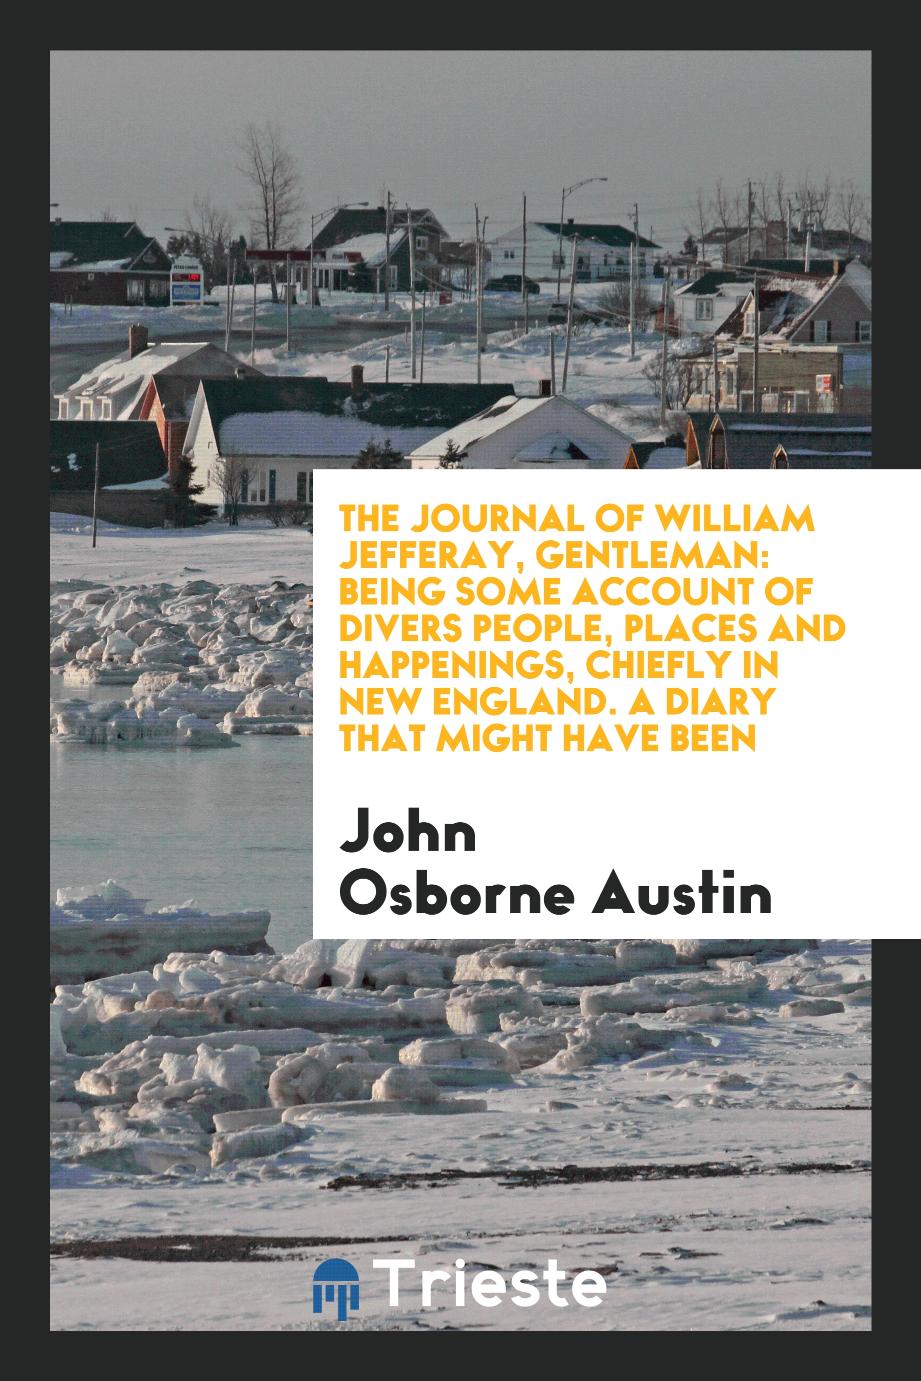 The Journal of William Jefferay, Gentleman: Being Some Account of Divers People, Places and Happenings, Chiefly in New England. A Diary That Might Have Been